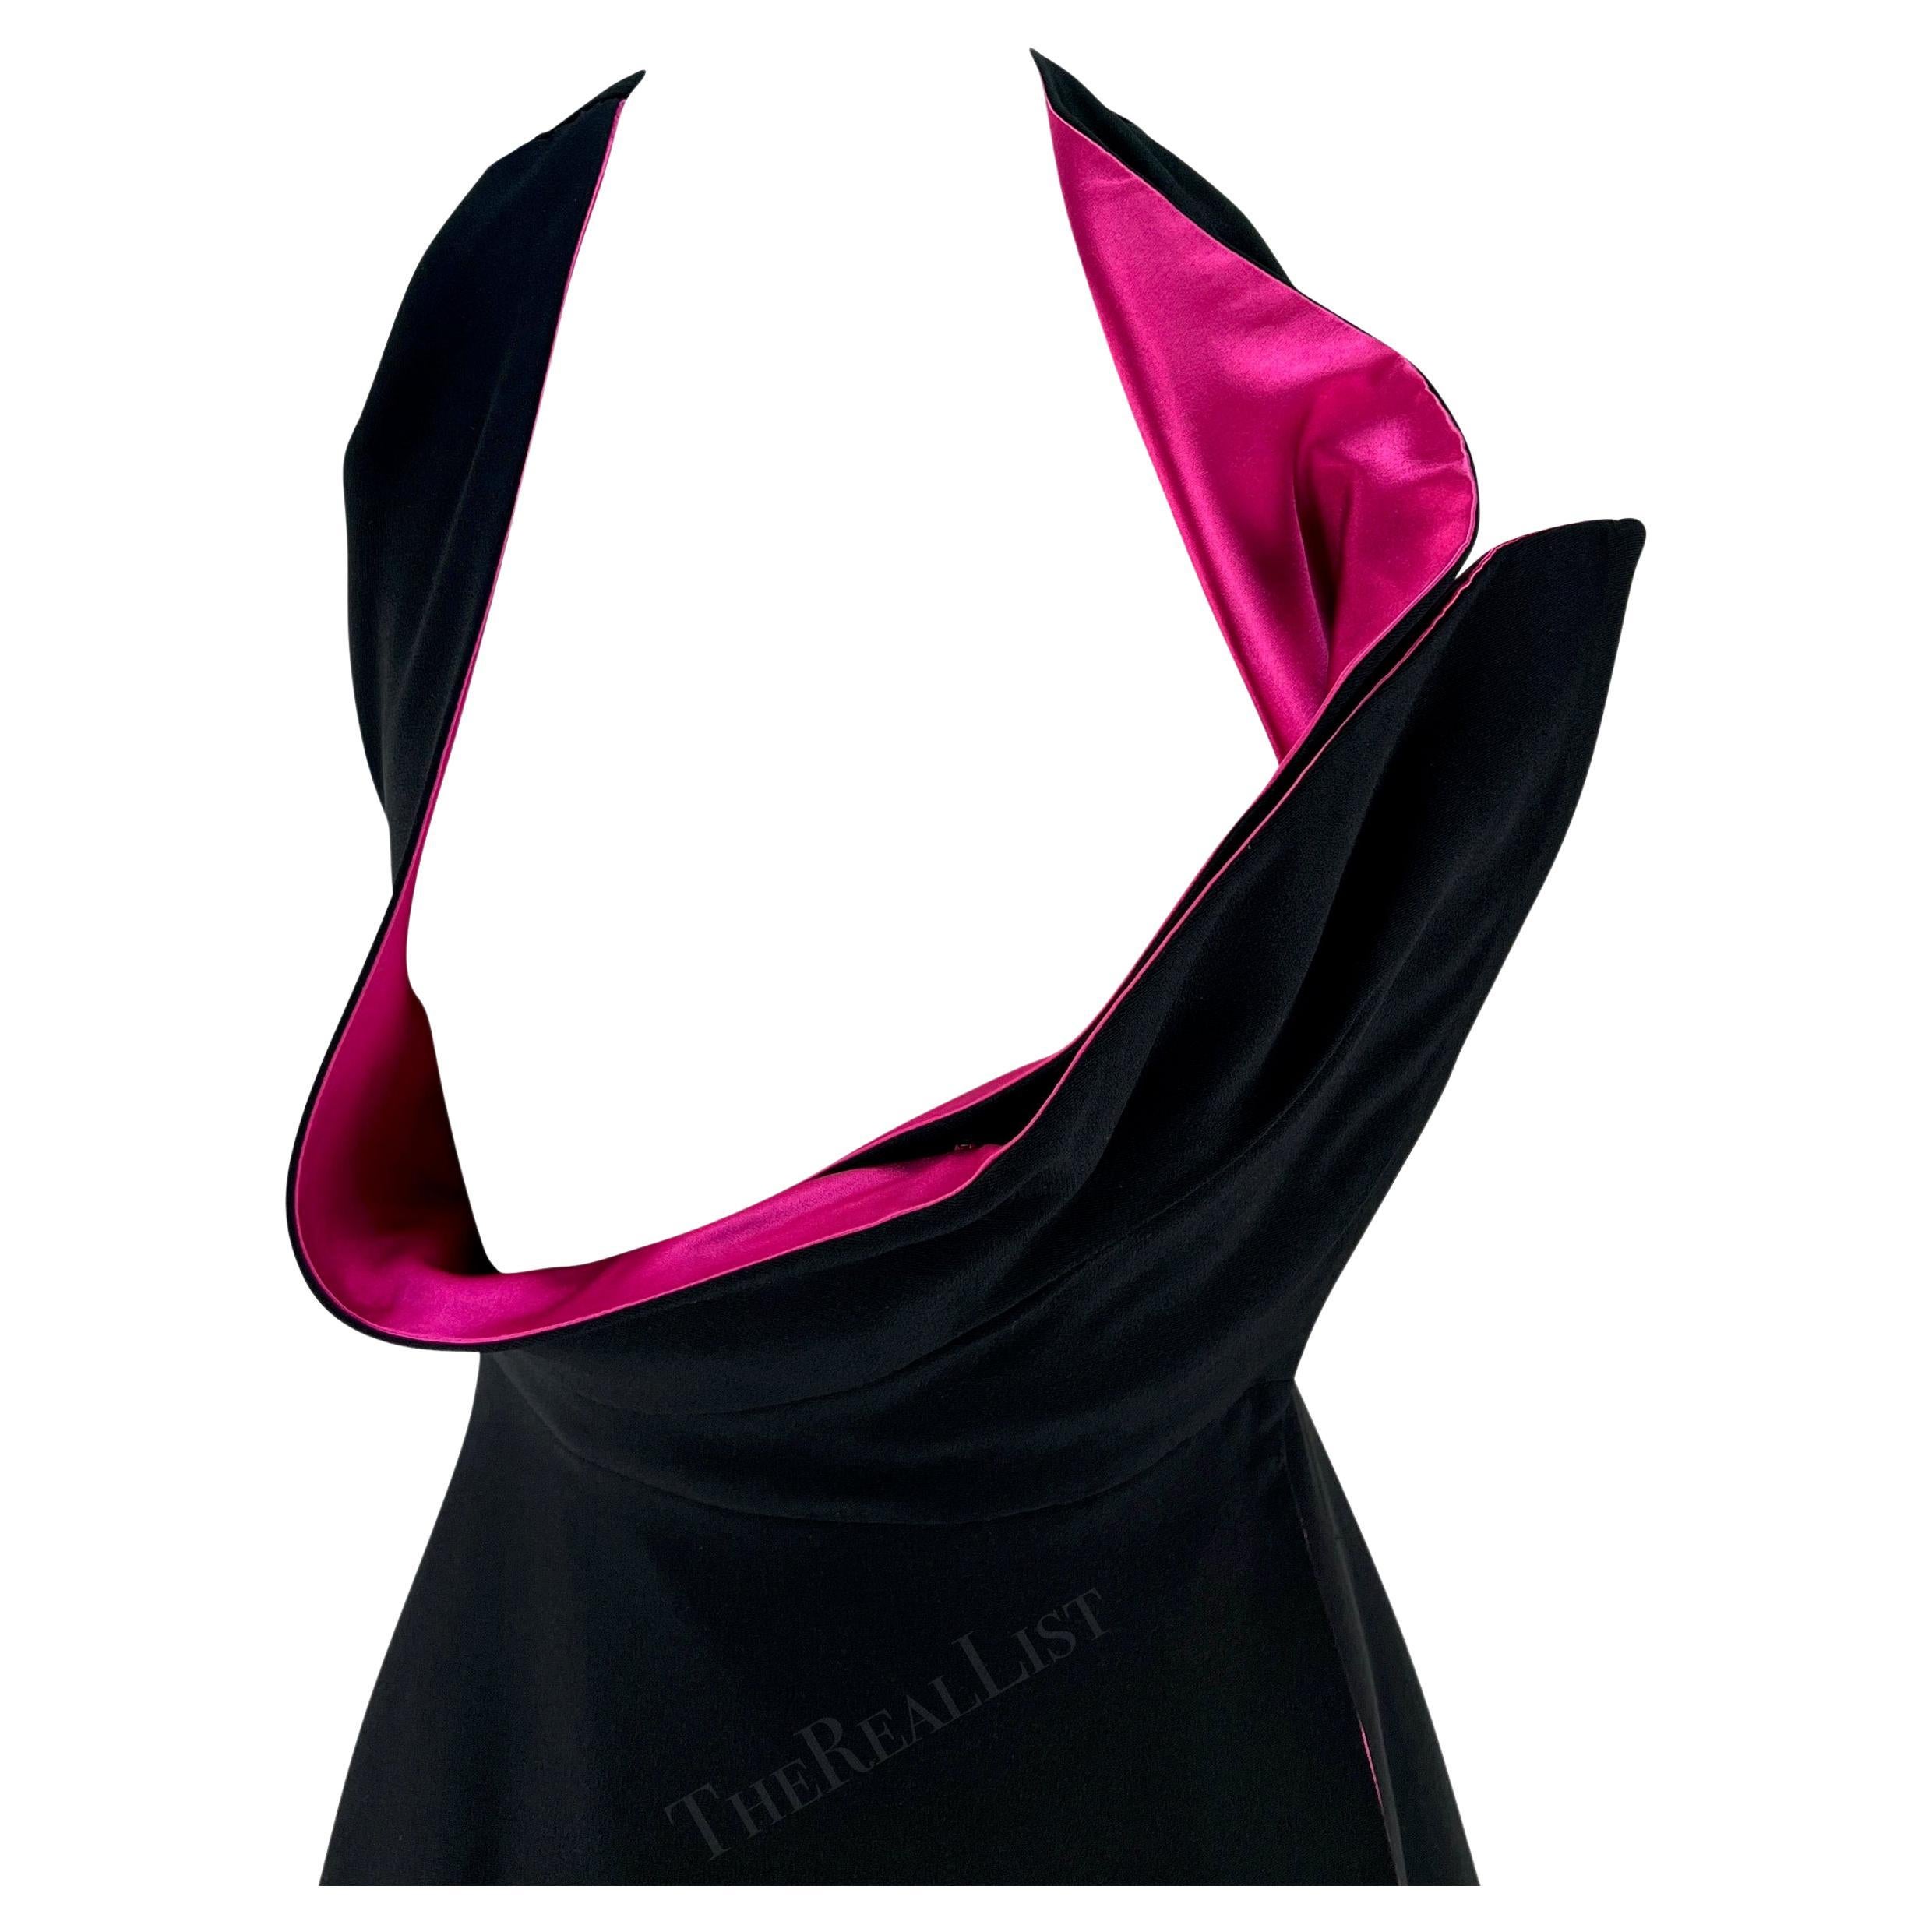 F/W 1991 Giani Versace Runway Open Bust Black Hot Pink Wrap Mini Dress In Good Condition For Sale In West Hollywood, CA